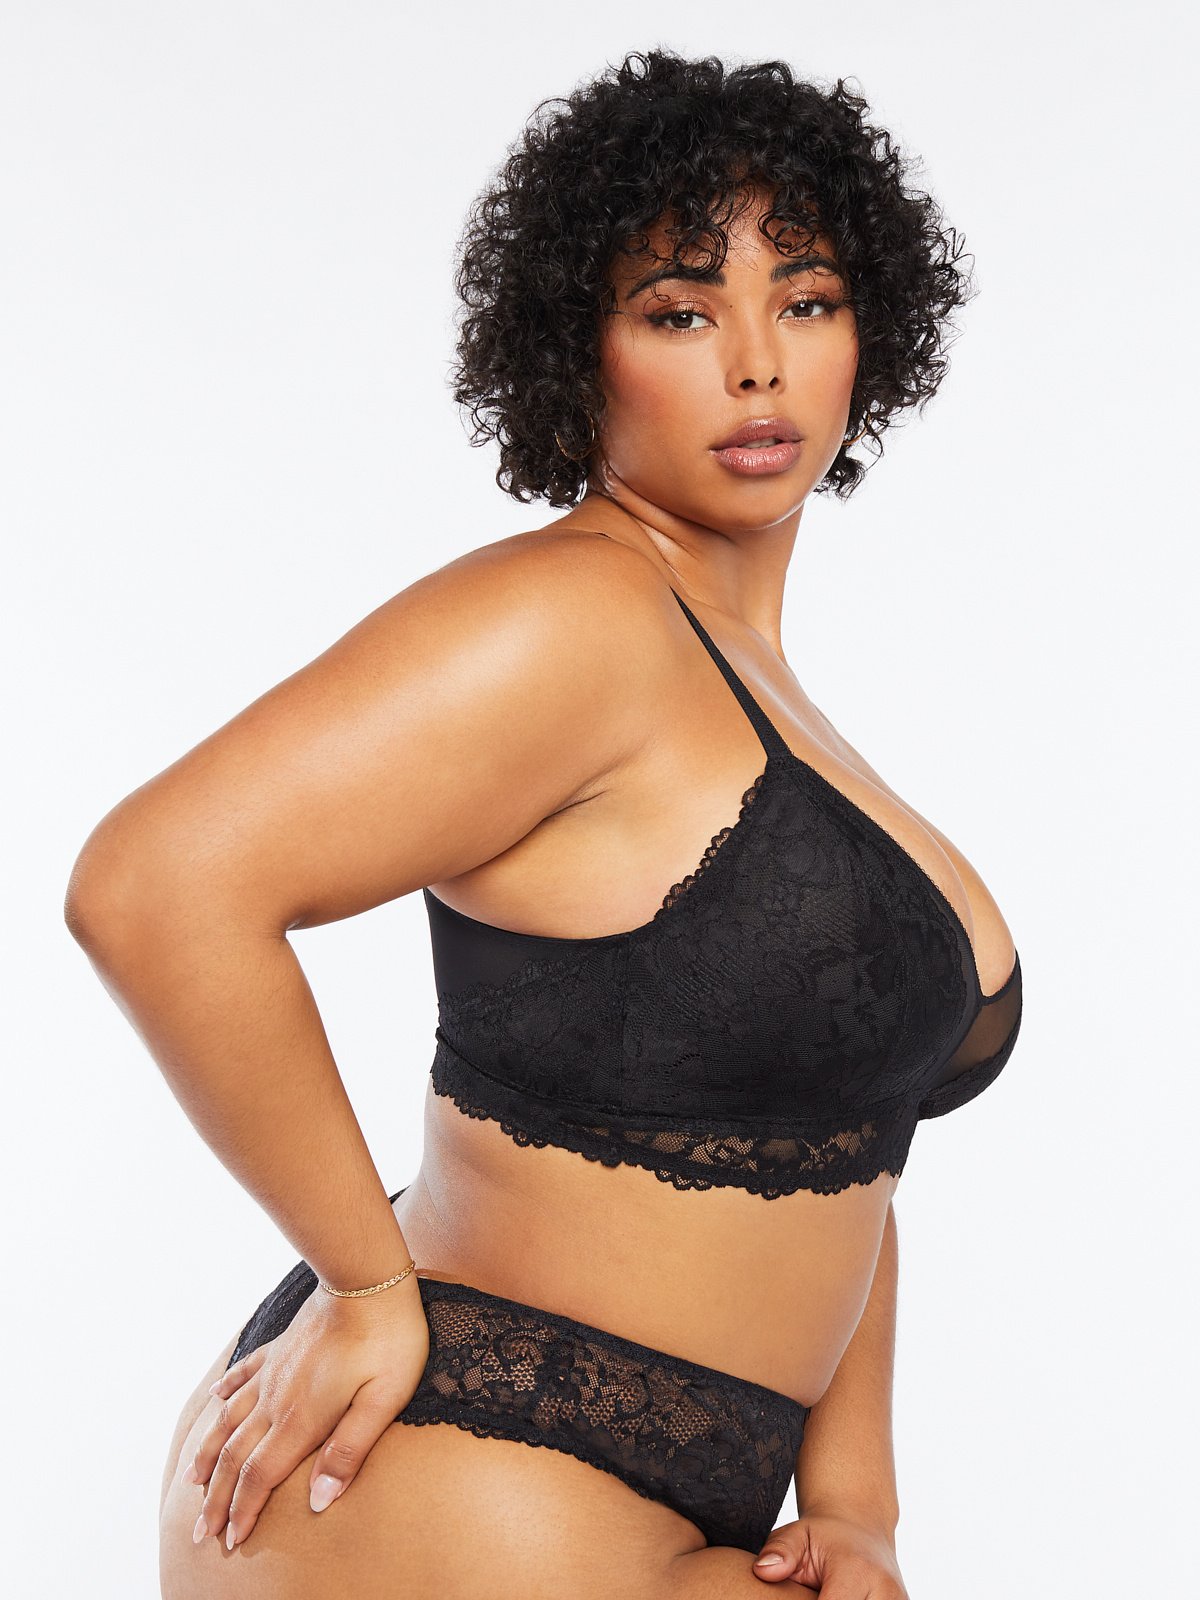  Plus Size Bras for Women Floral Lace Bralette Wirefree